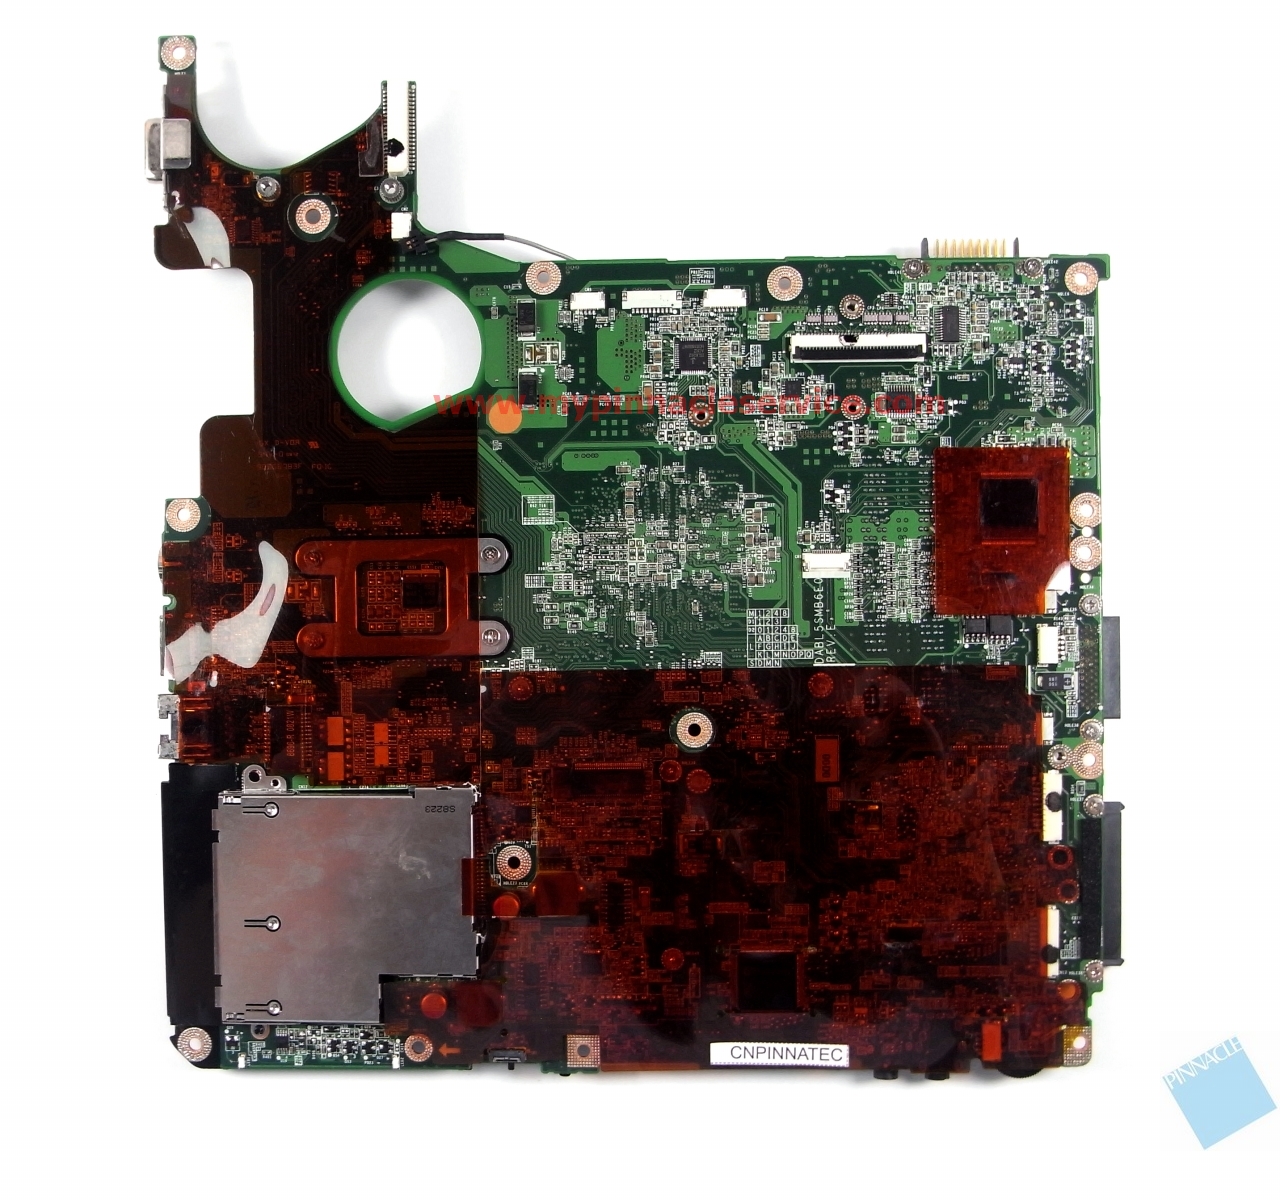 a000040950-a000030140-motherboard-for-toshiba-satellite-a300-p300-dabl5smb6e0-31bl5mb00d0-rimg0064.jpg